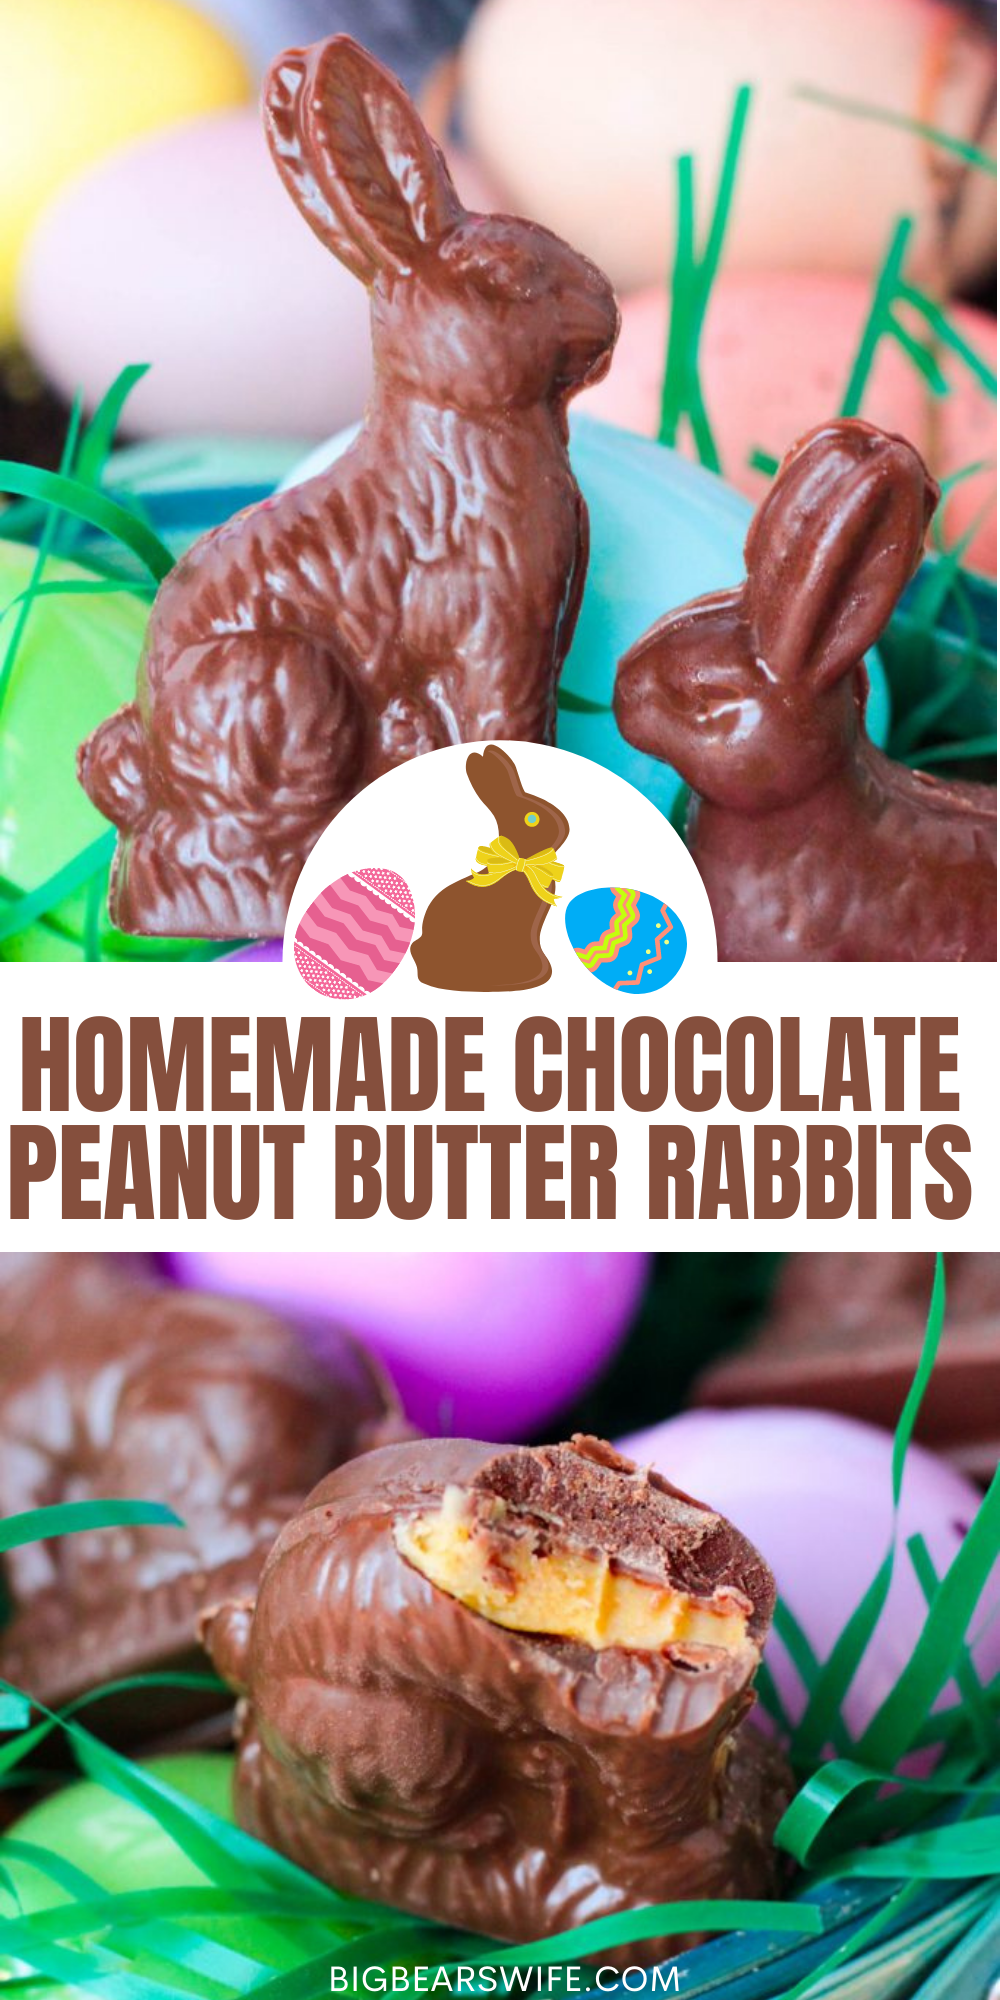 Little Homemade Chocolate Peanut Butter Rabbits are just perfect for Easter Baskets! Make them like this with a peanut butter filling, leave them hollow or make them into solid chocolate bunnies! 
 via @bigbearswife